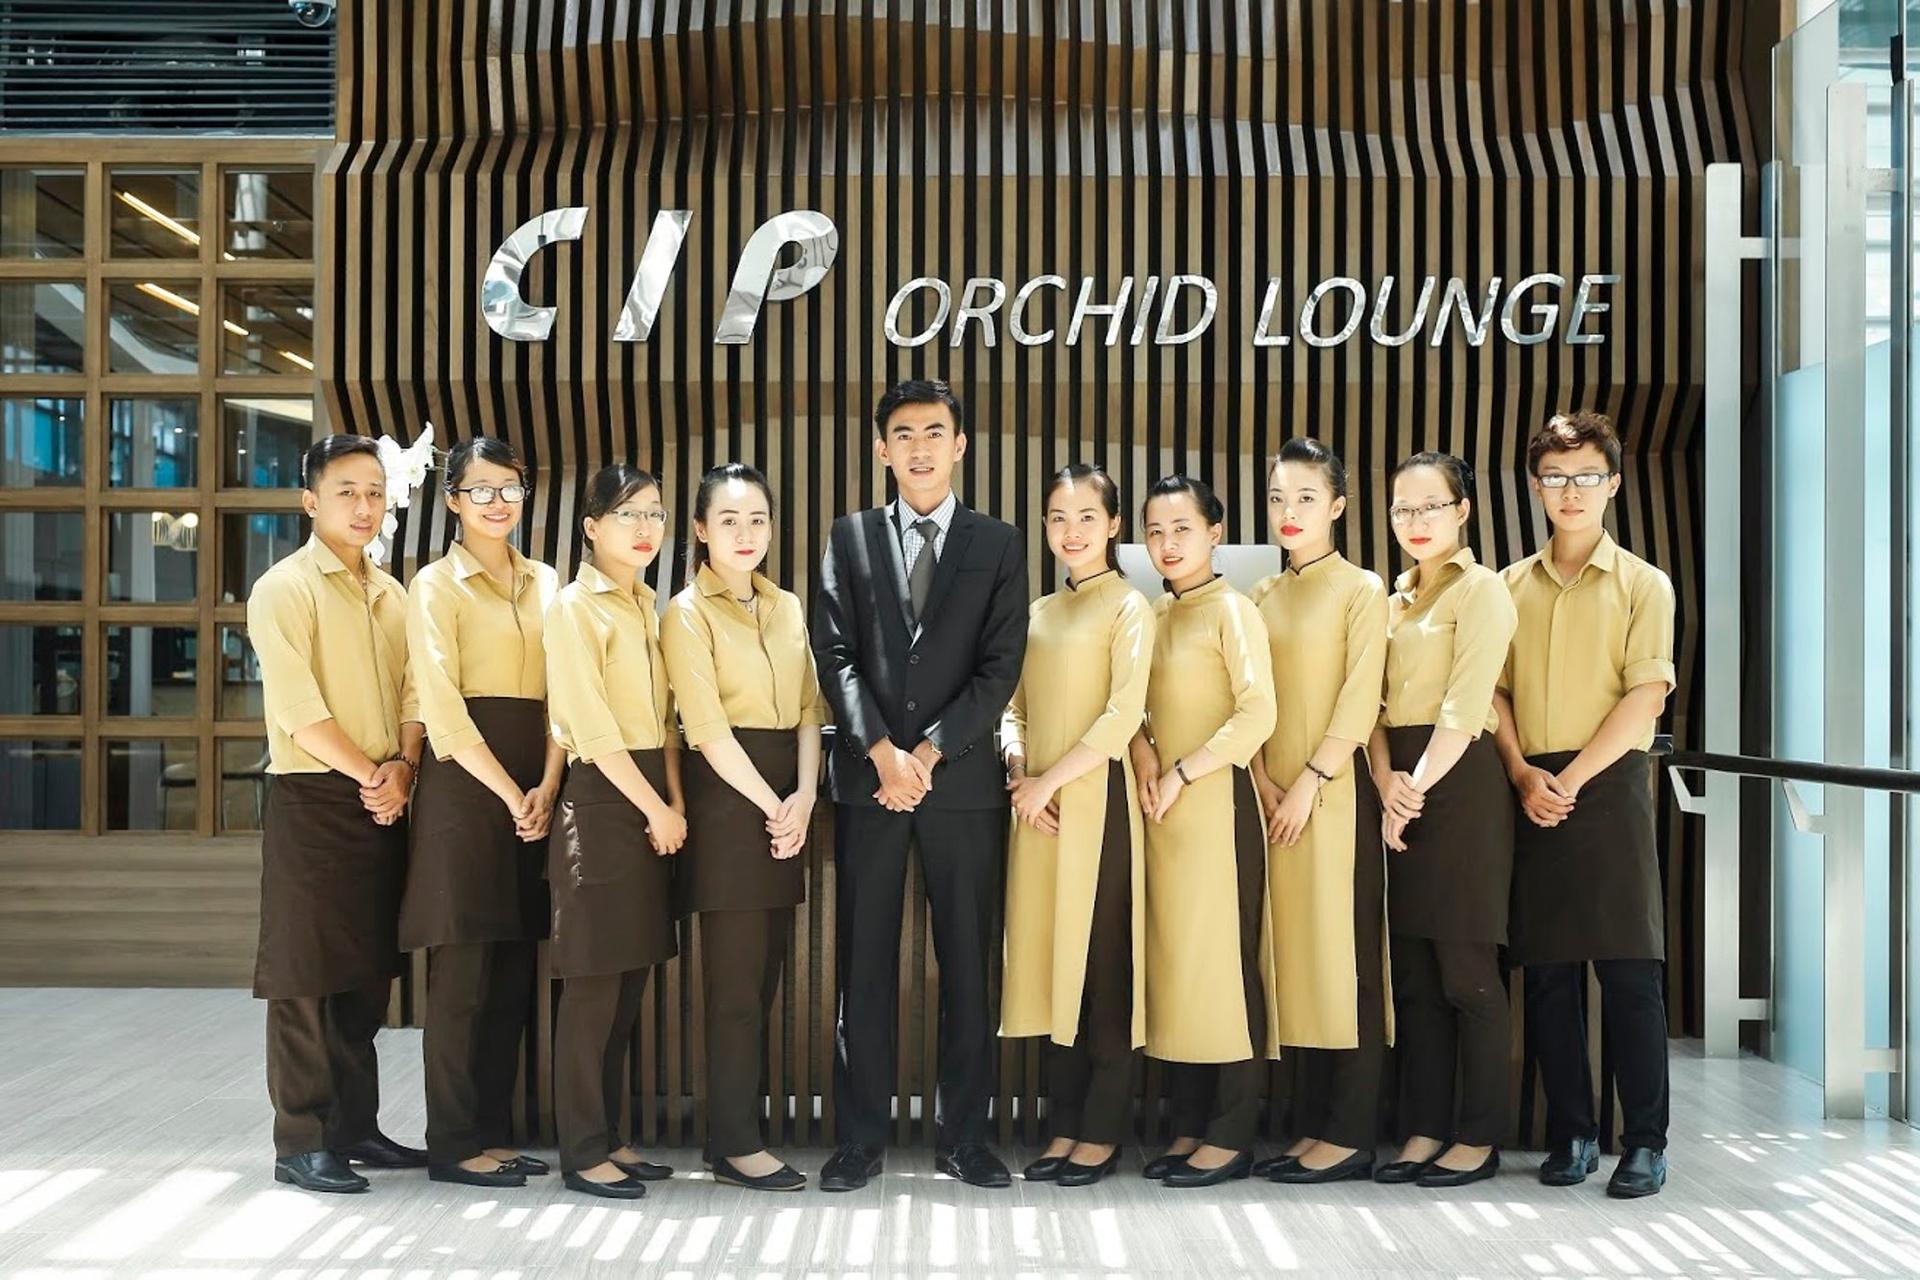 CIP Orchid Lounge image 9 of 26